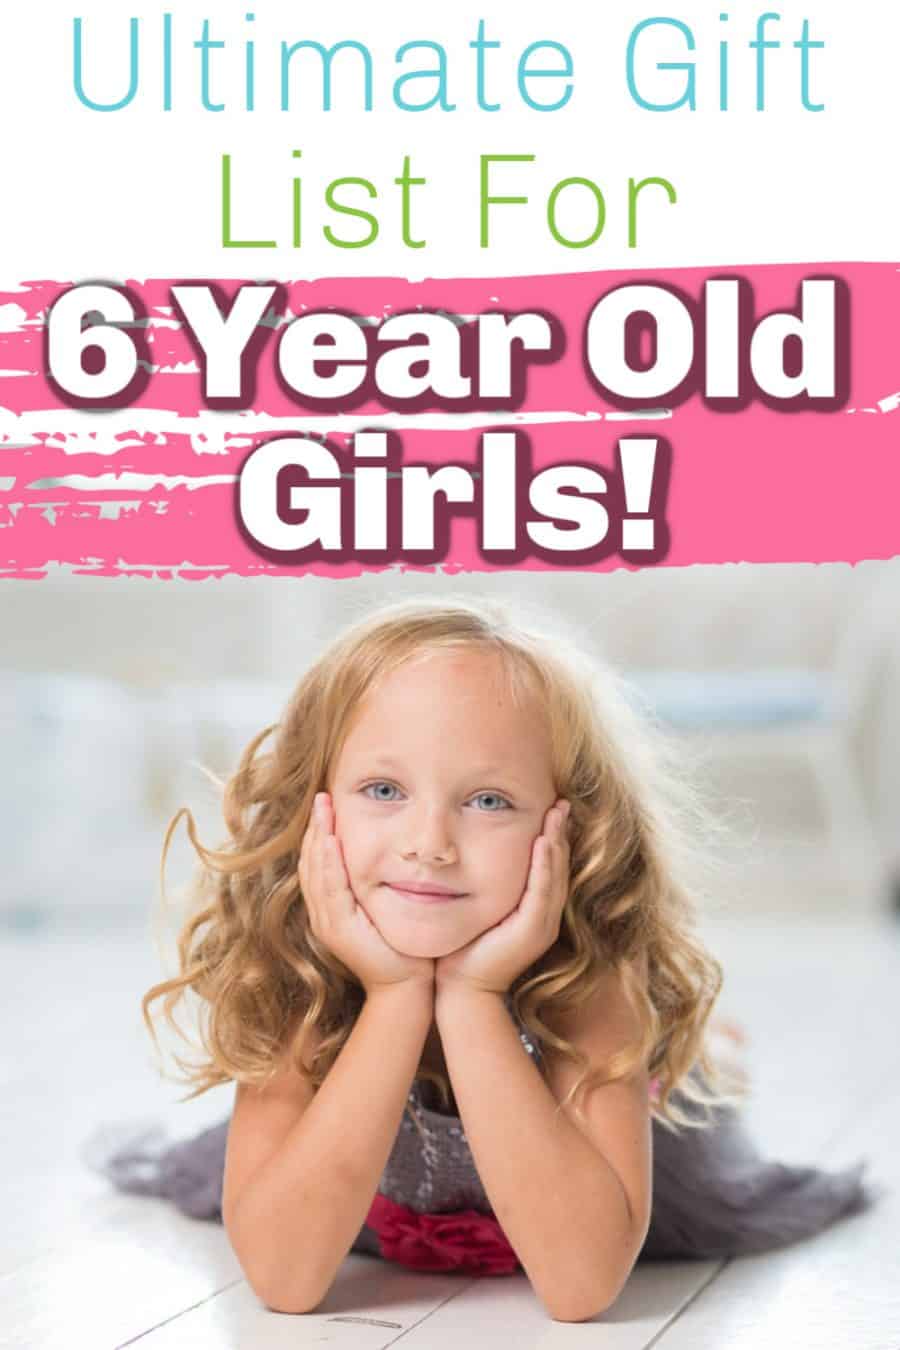 The Top 15 Gifts For 6 Year Old Girls (In 2020)